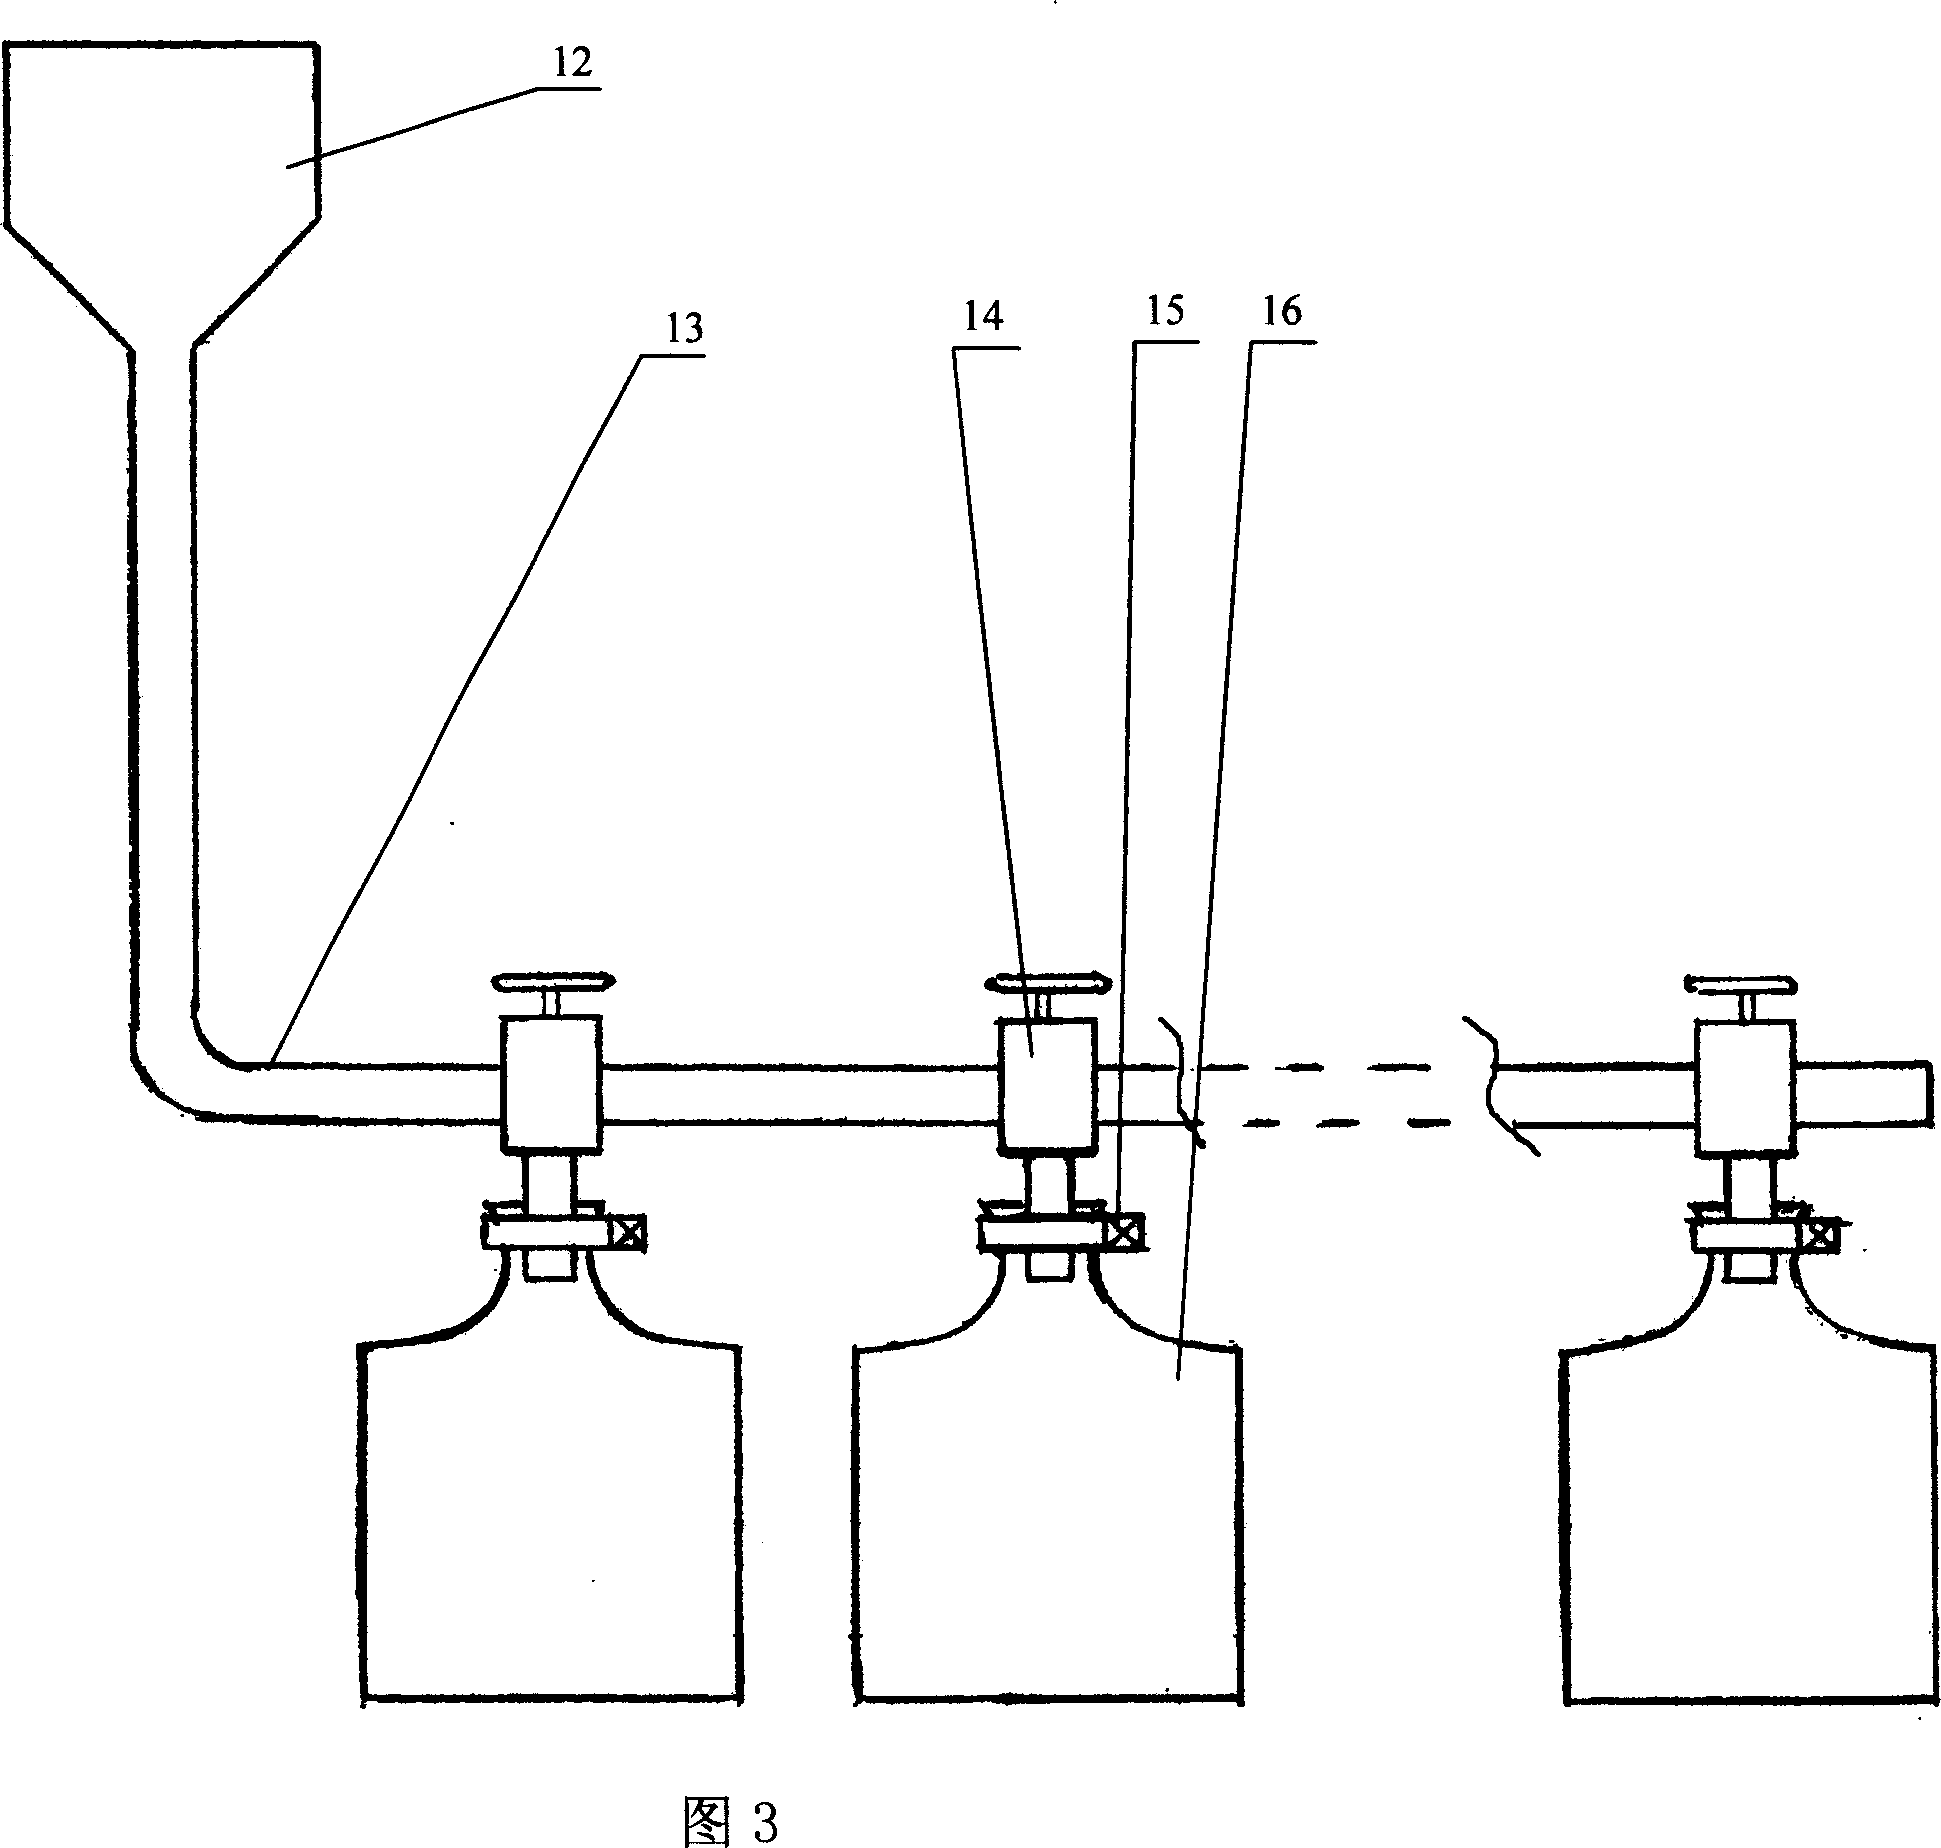 Method for treating waste water